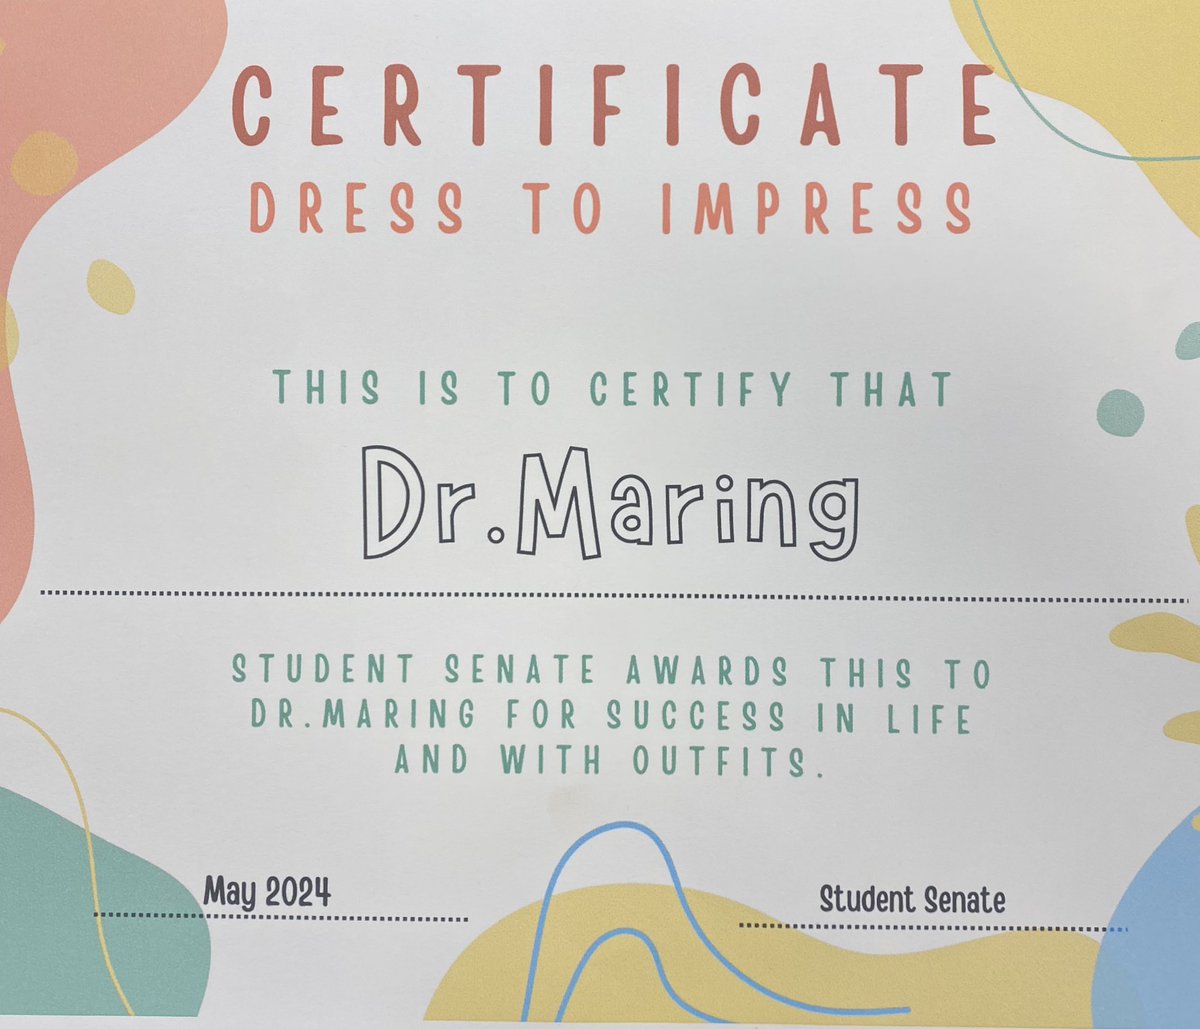 Never thought I’d get an award for “success in life and with outfits” 😂 Student senate appreciated all #glcsMS staff with individual awards, coffee and donuts! #gogulllake